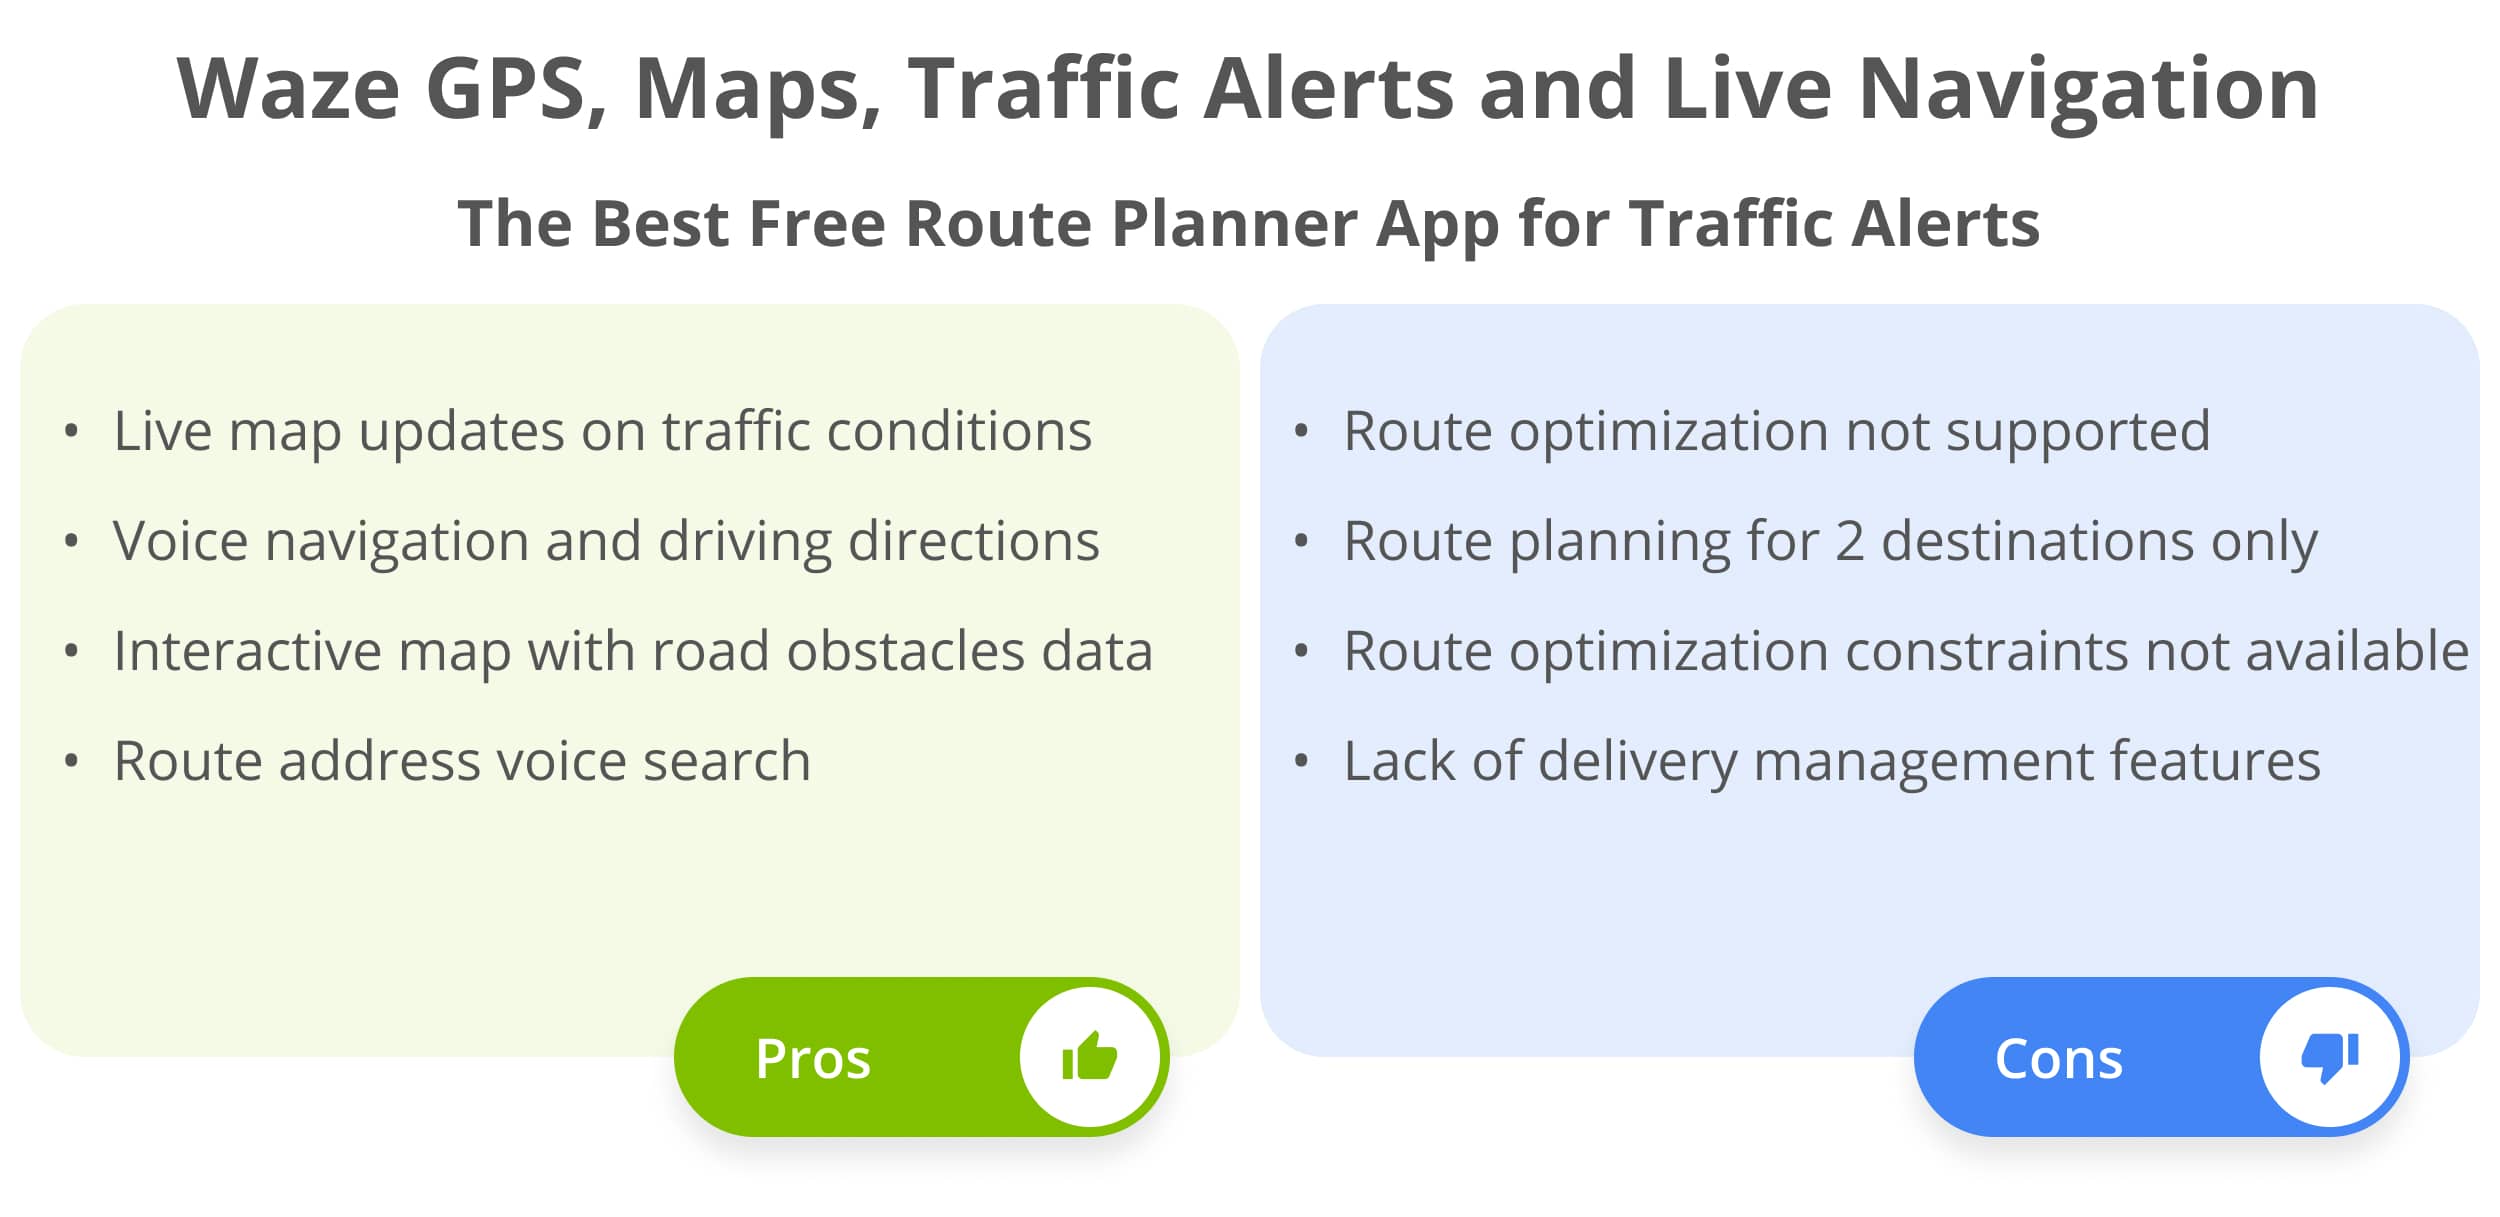 The pros and cons of using Waze free route planner app for route navigation.